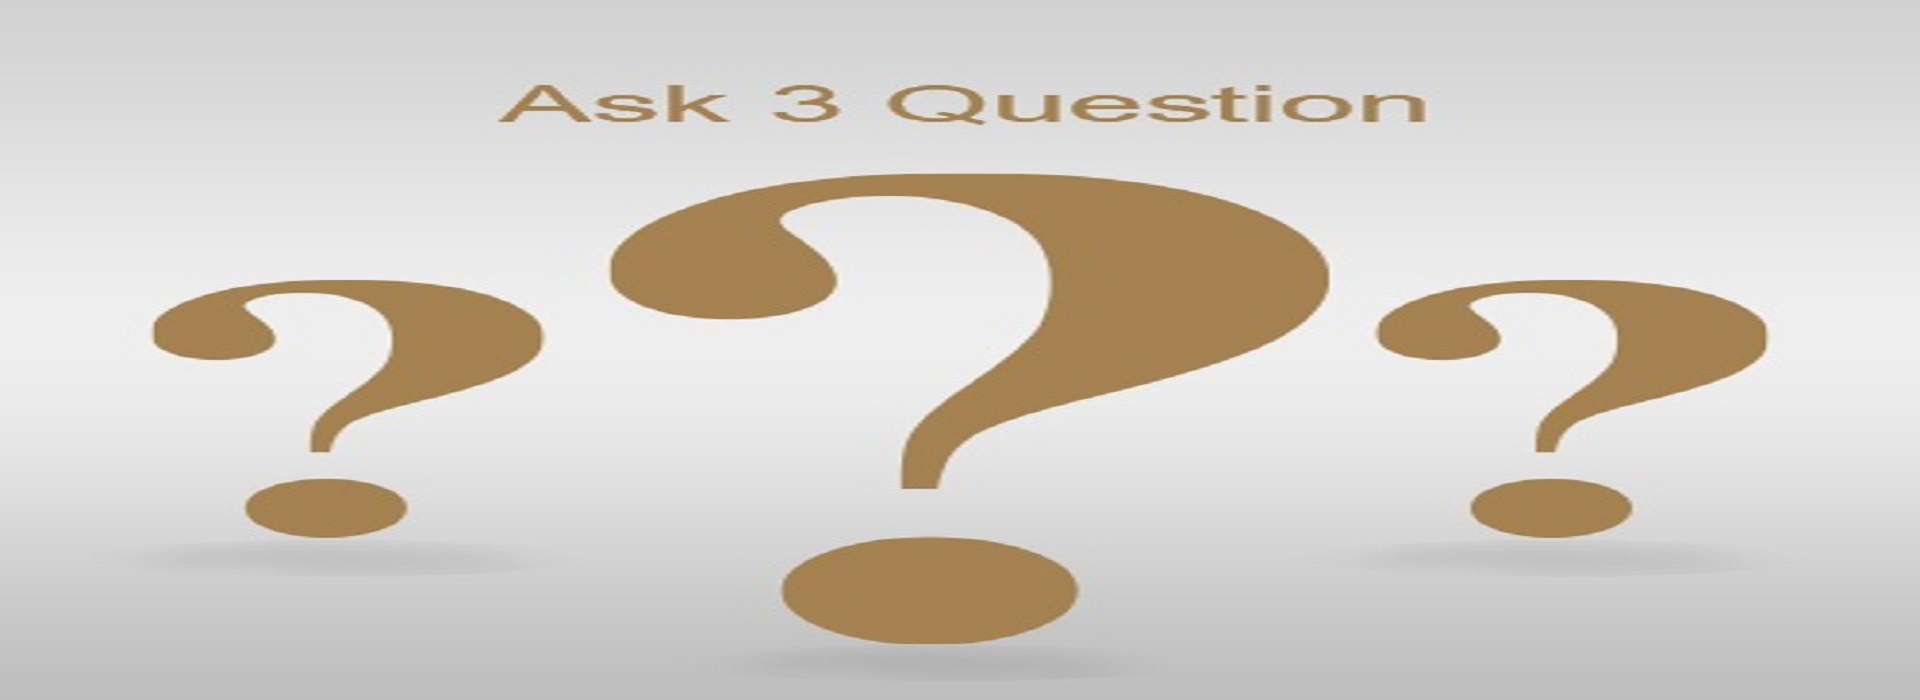 Ask 3 Question